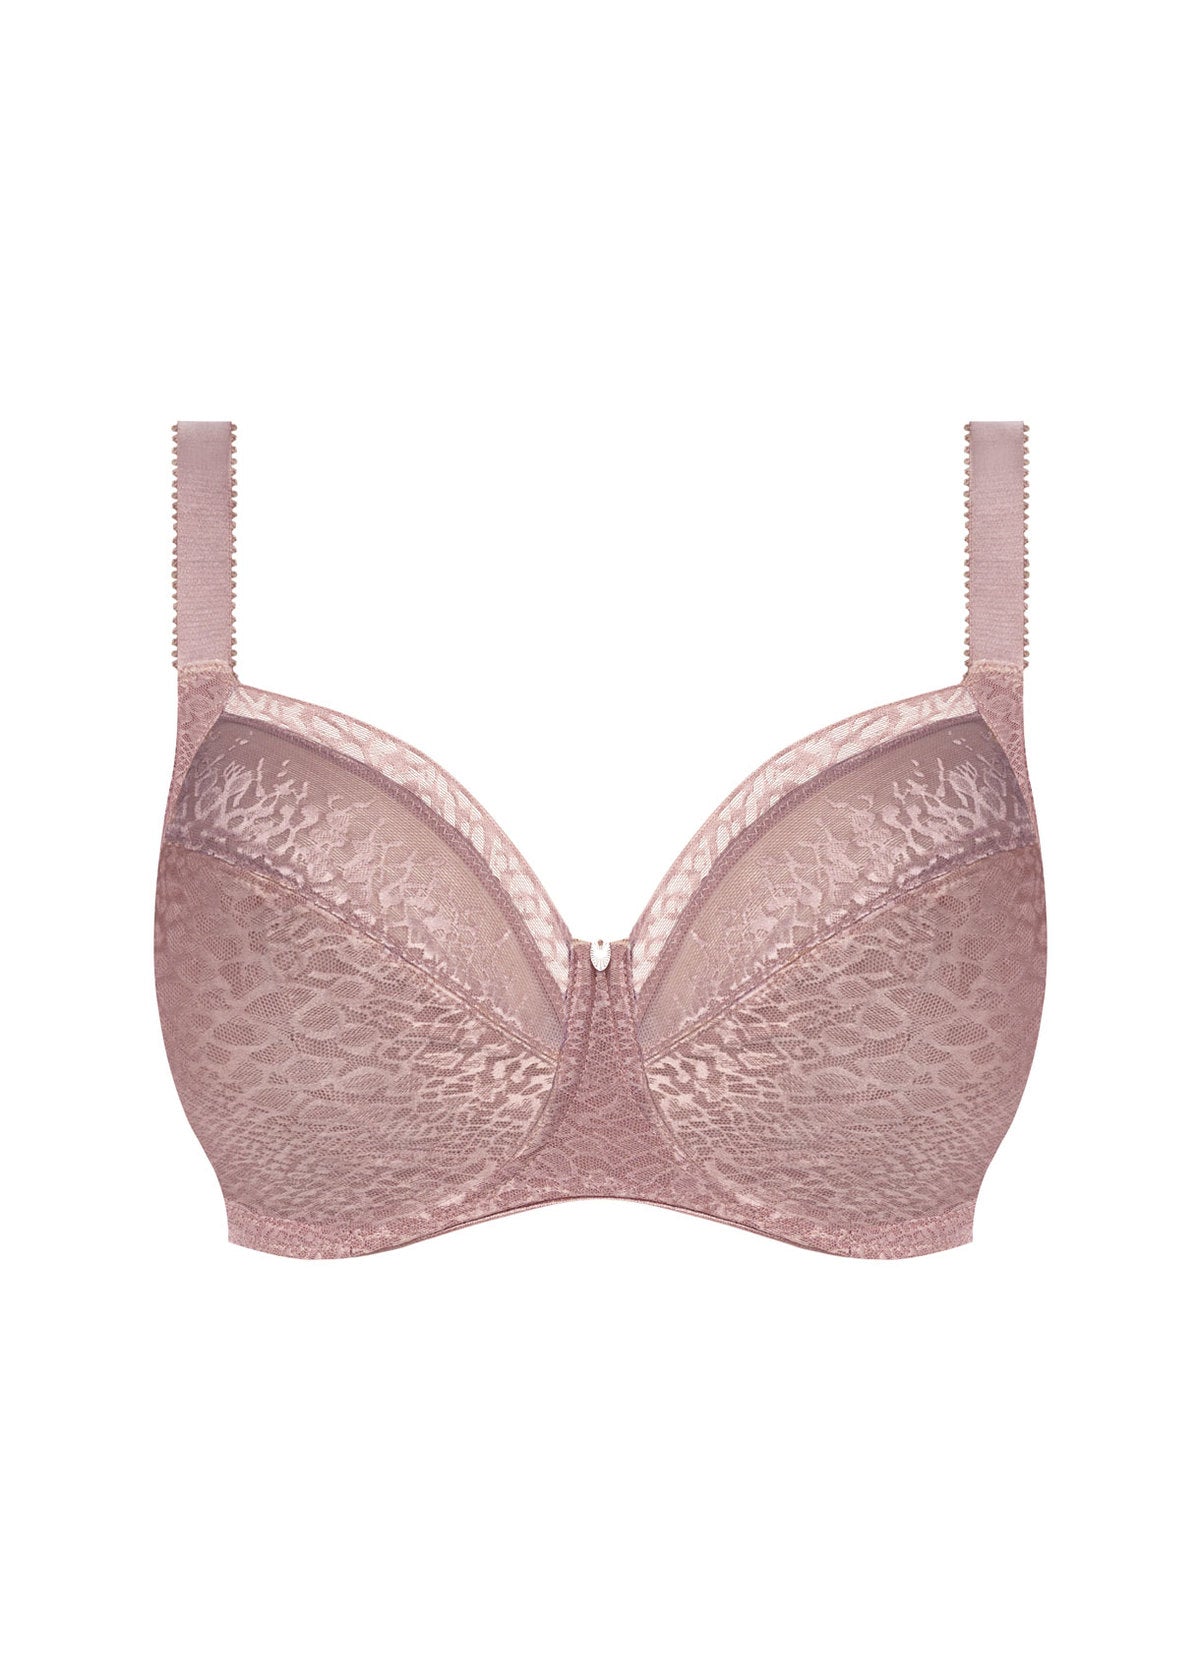 Envisage Full Cup Side Support Bra - Taupe